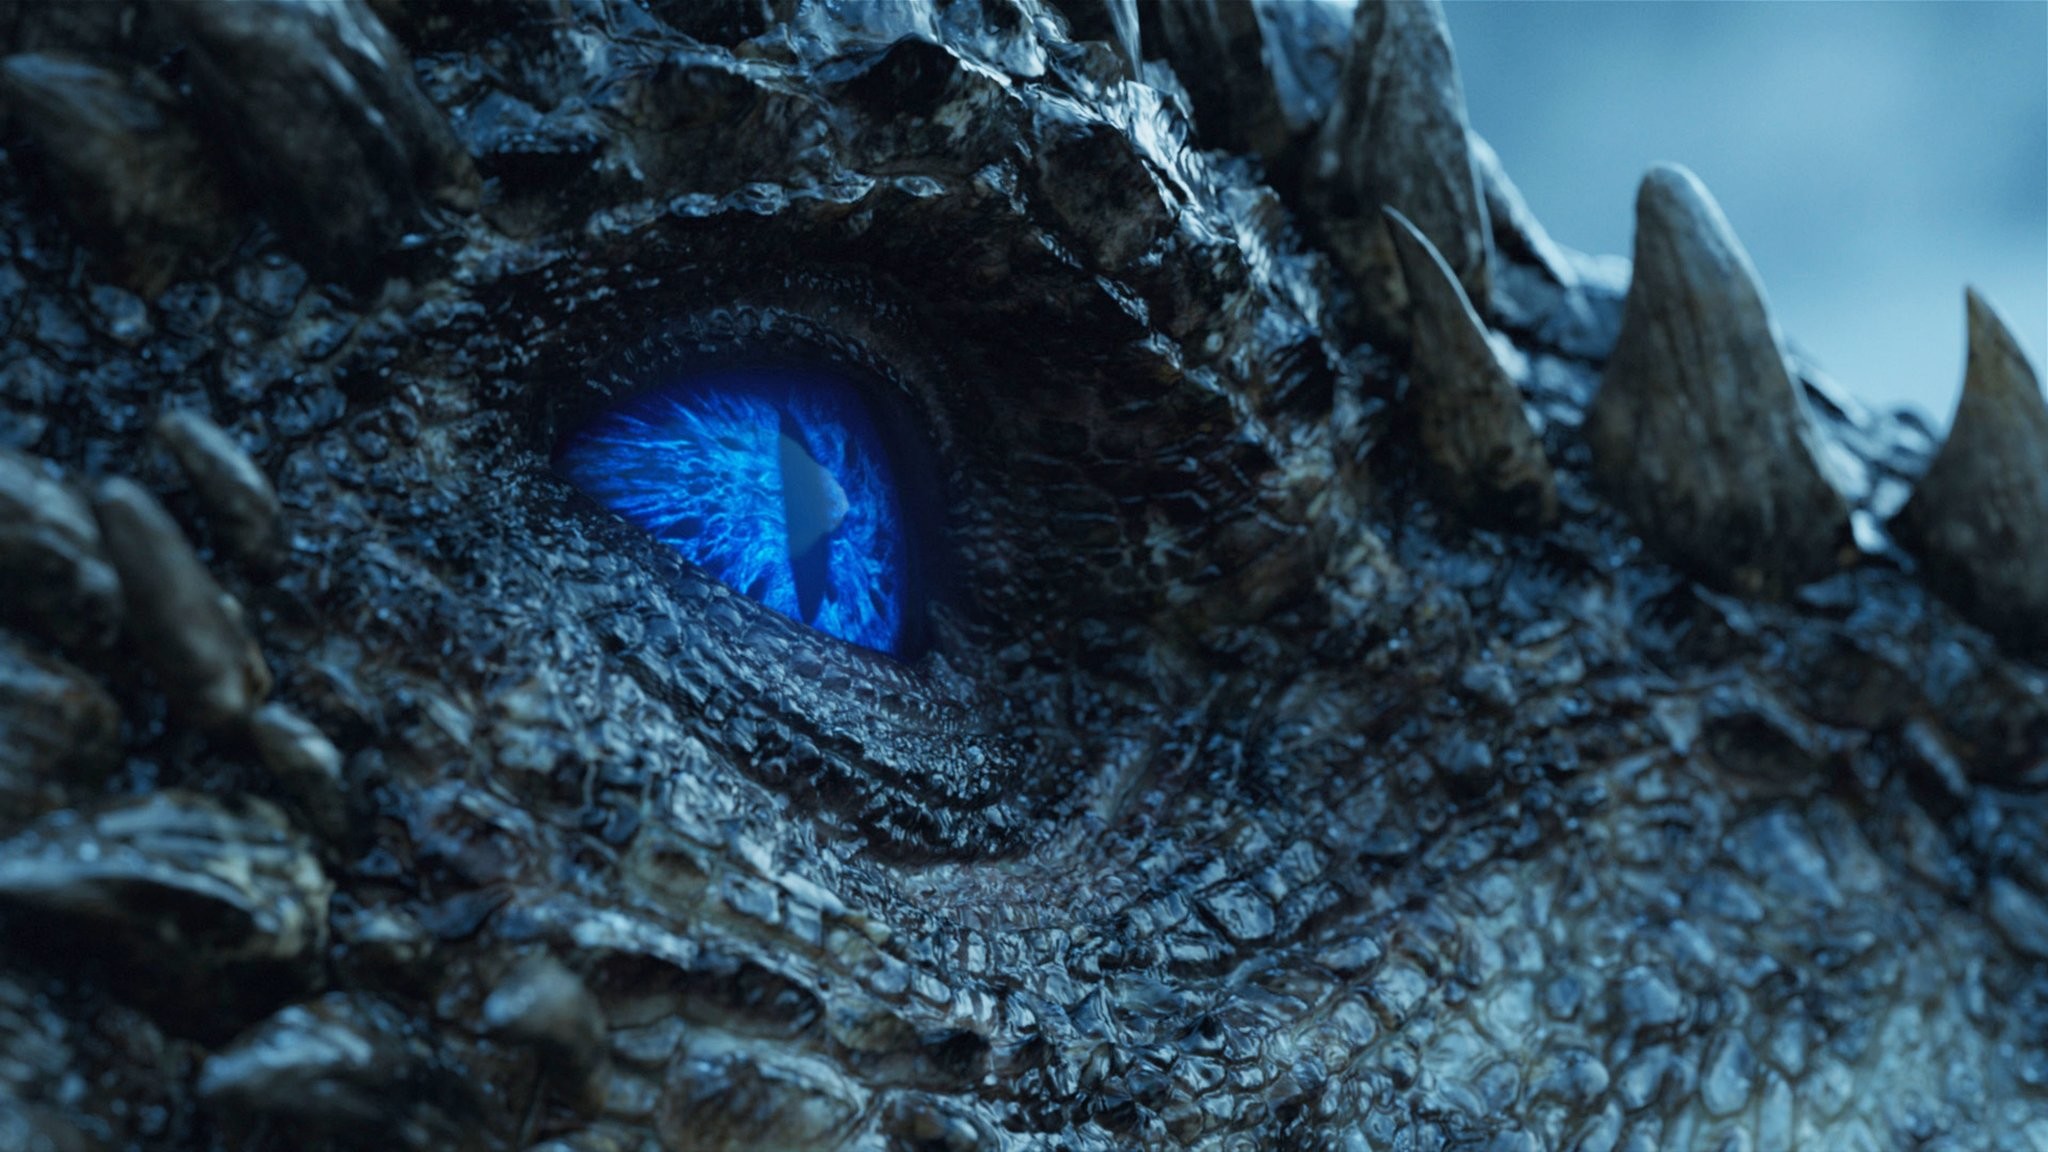 So, Is Viserion a Wight or a White Walker?